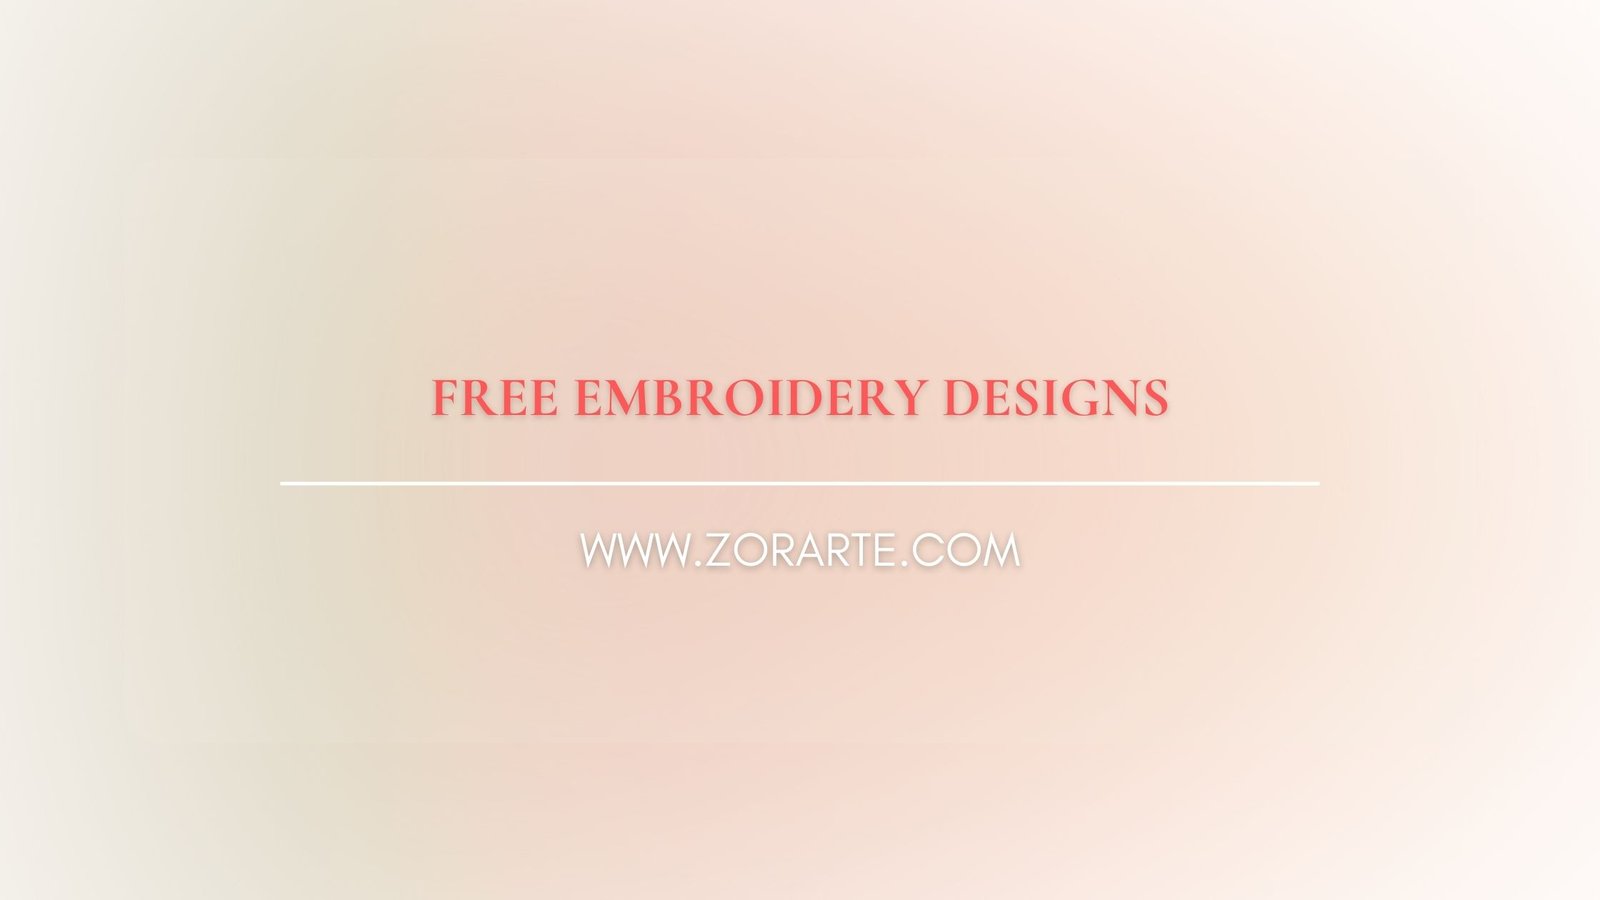 Free Embroidery Designs